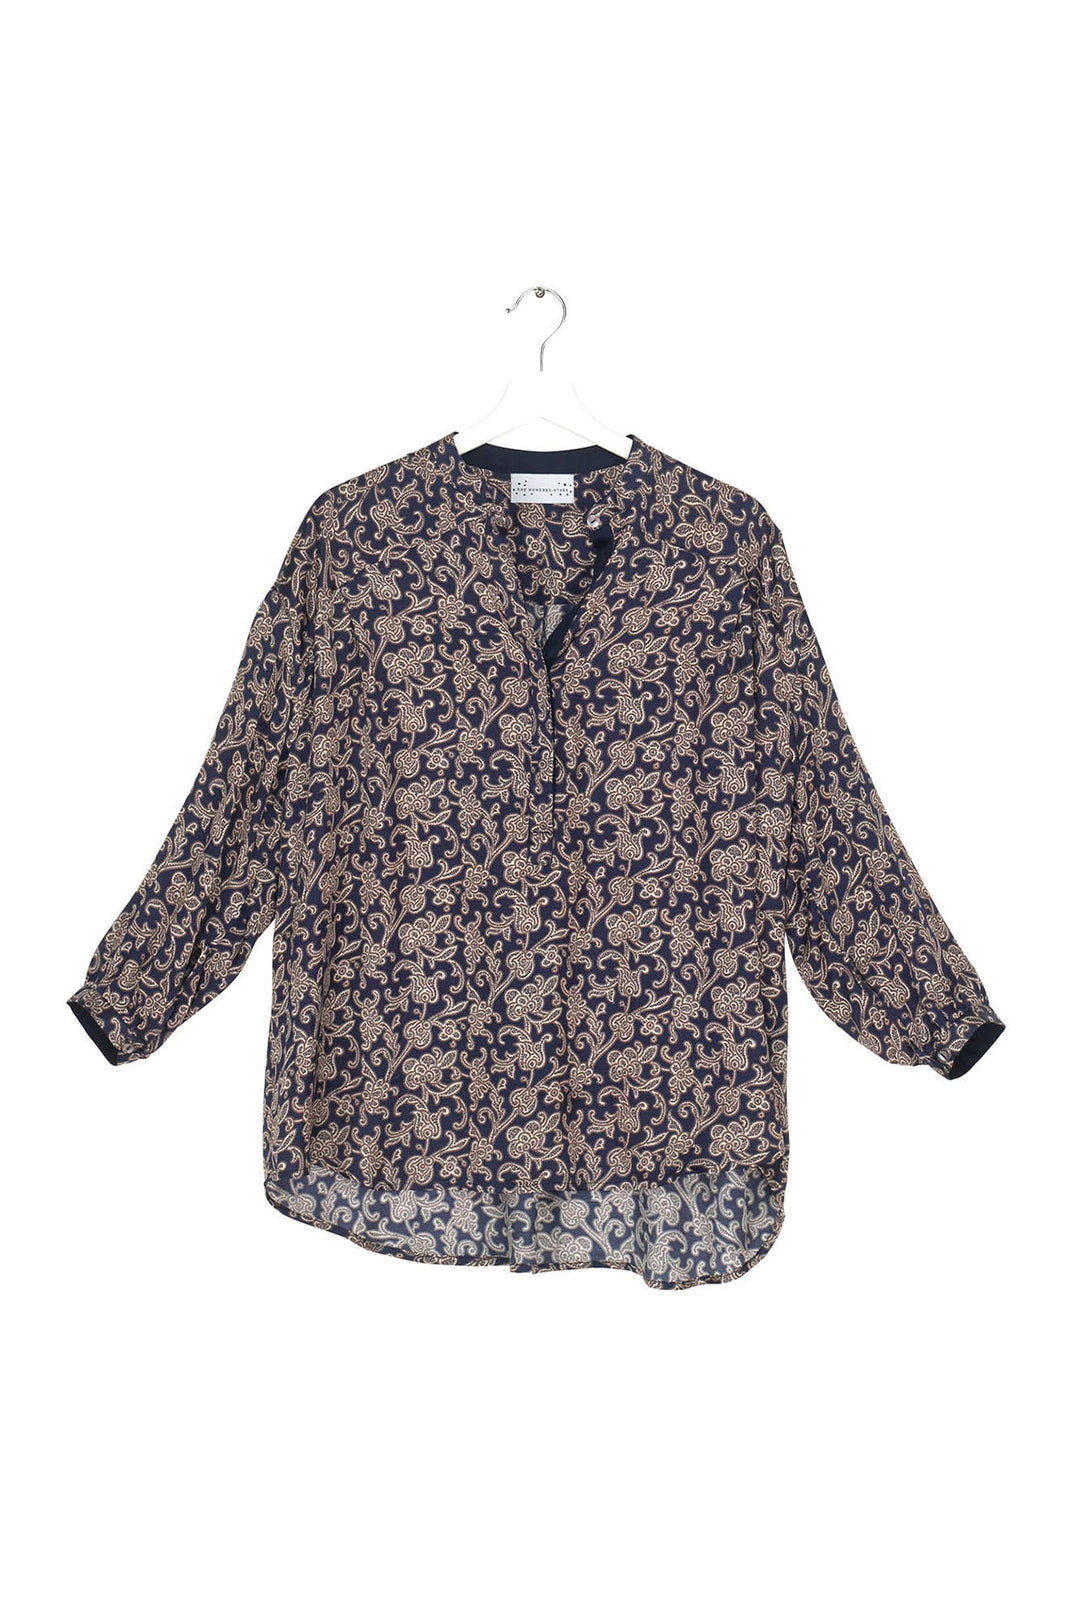 Floral Paisley Blue Darcy Shirt